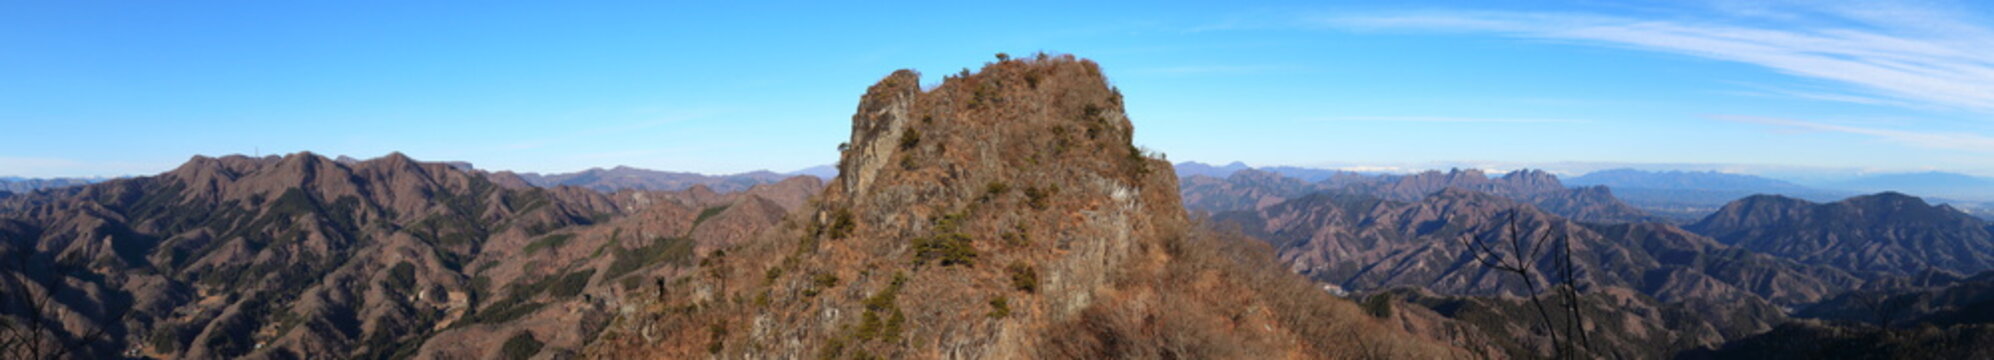 View from the summit of 100 famous mountains of Gunma and Mt. Shikadake (late autumn / early winter) (panorama) ぐんま百名山・鹿岳山頂からの展望 (晩秋/初冬)(パノラマ)